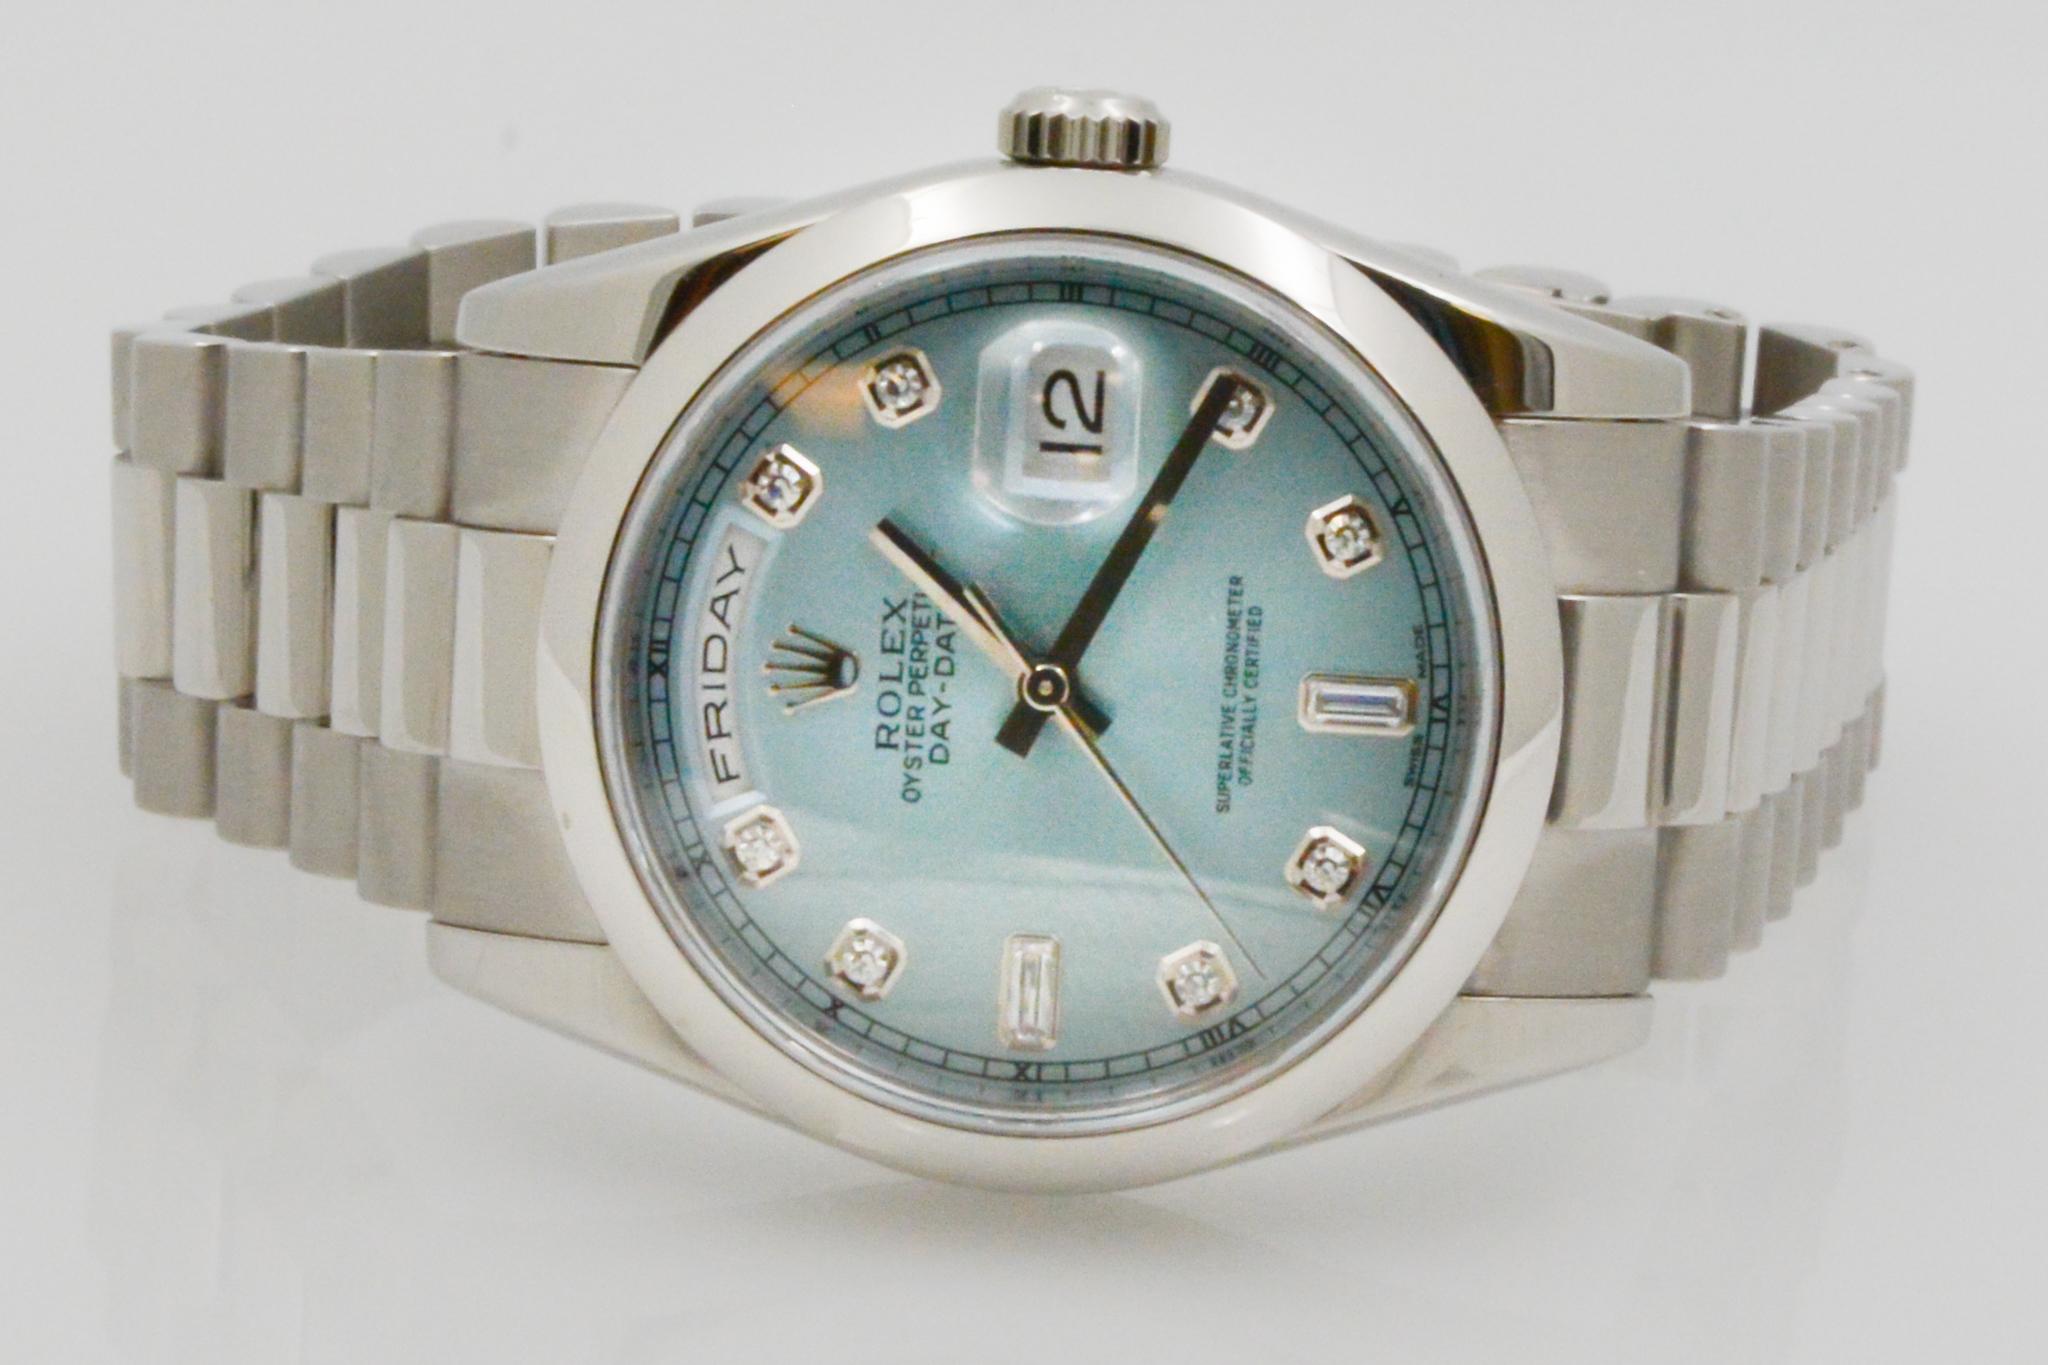 Rolex CPO Platinum Day Date
Model: Platinum Day Date #M118206
Movement: Automatic
Case Size: 36mm
Dial: Ice Blue Diamond
Circa 2001, box & papers